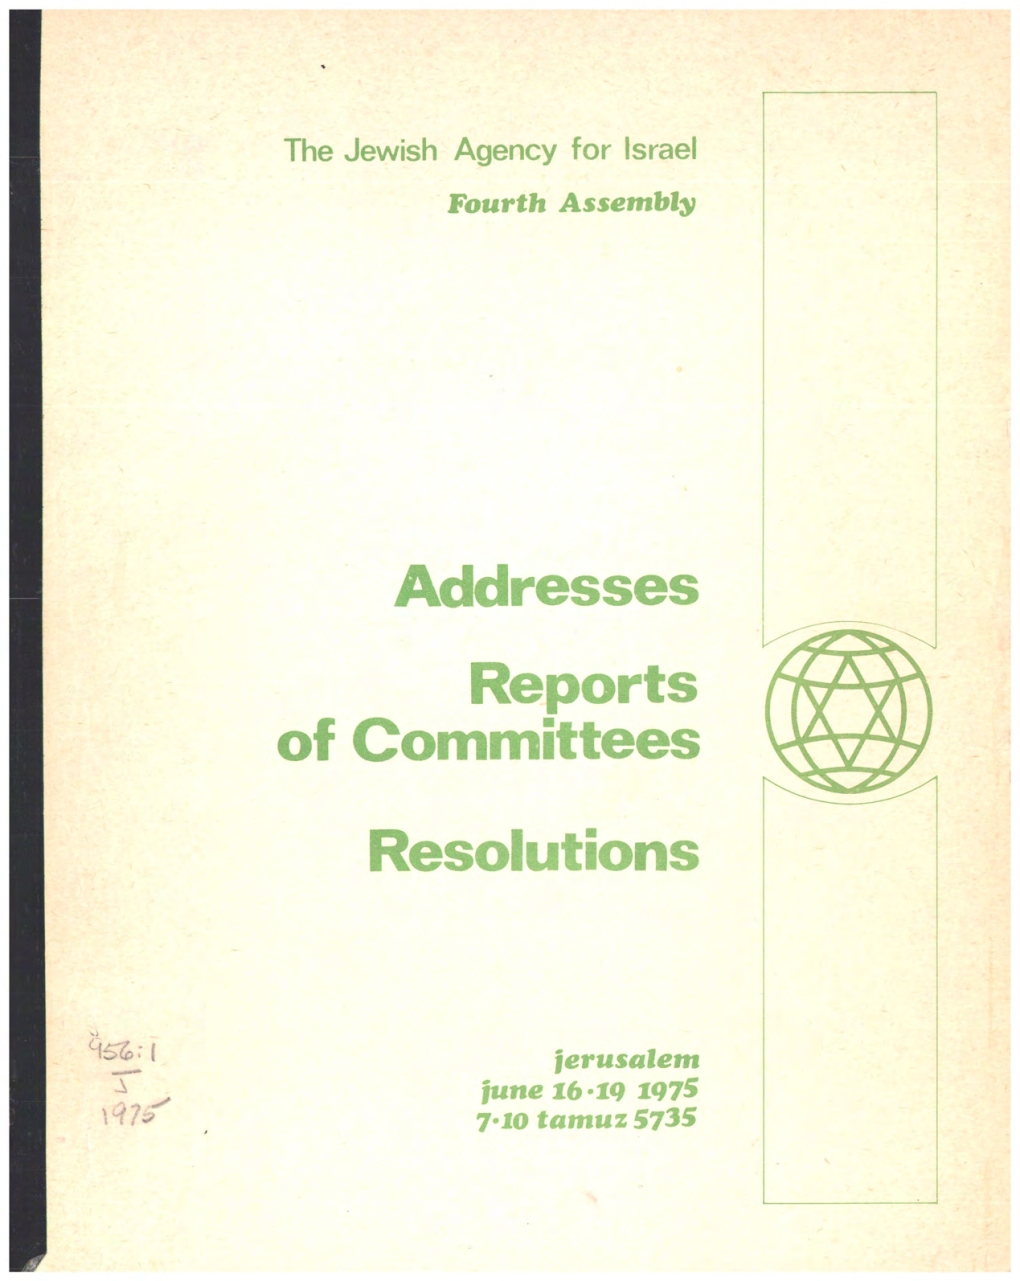 Addresses Reports of Committees Resolutions